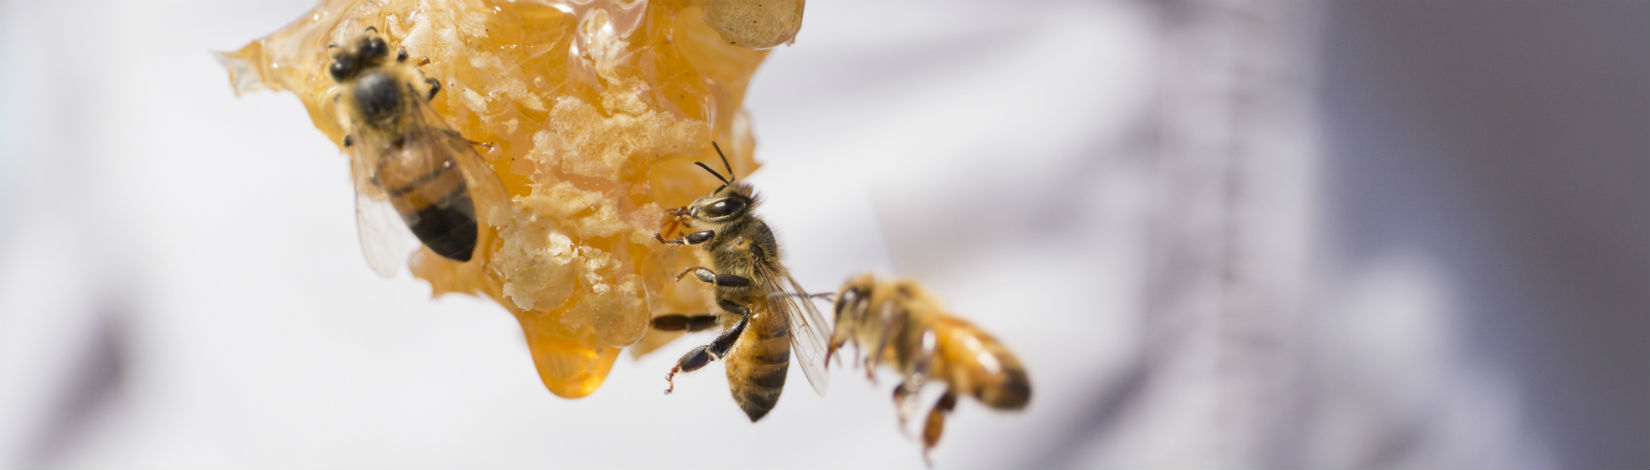 Bees on a piece of honeycomb